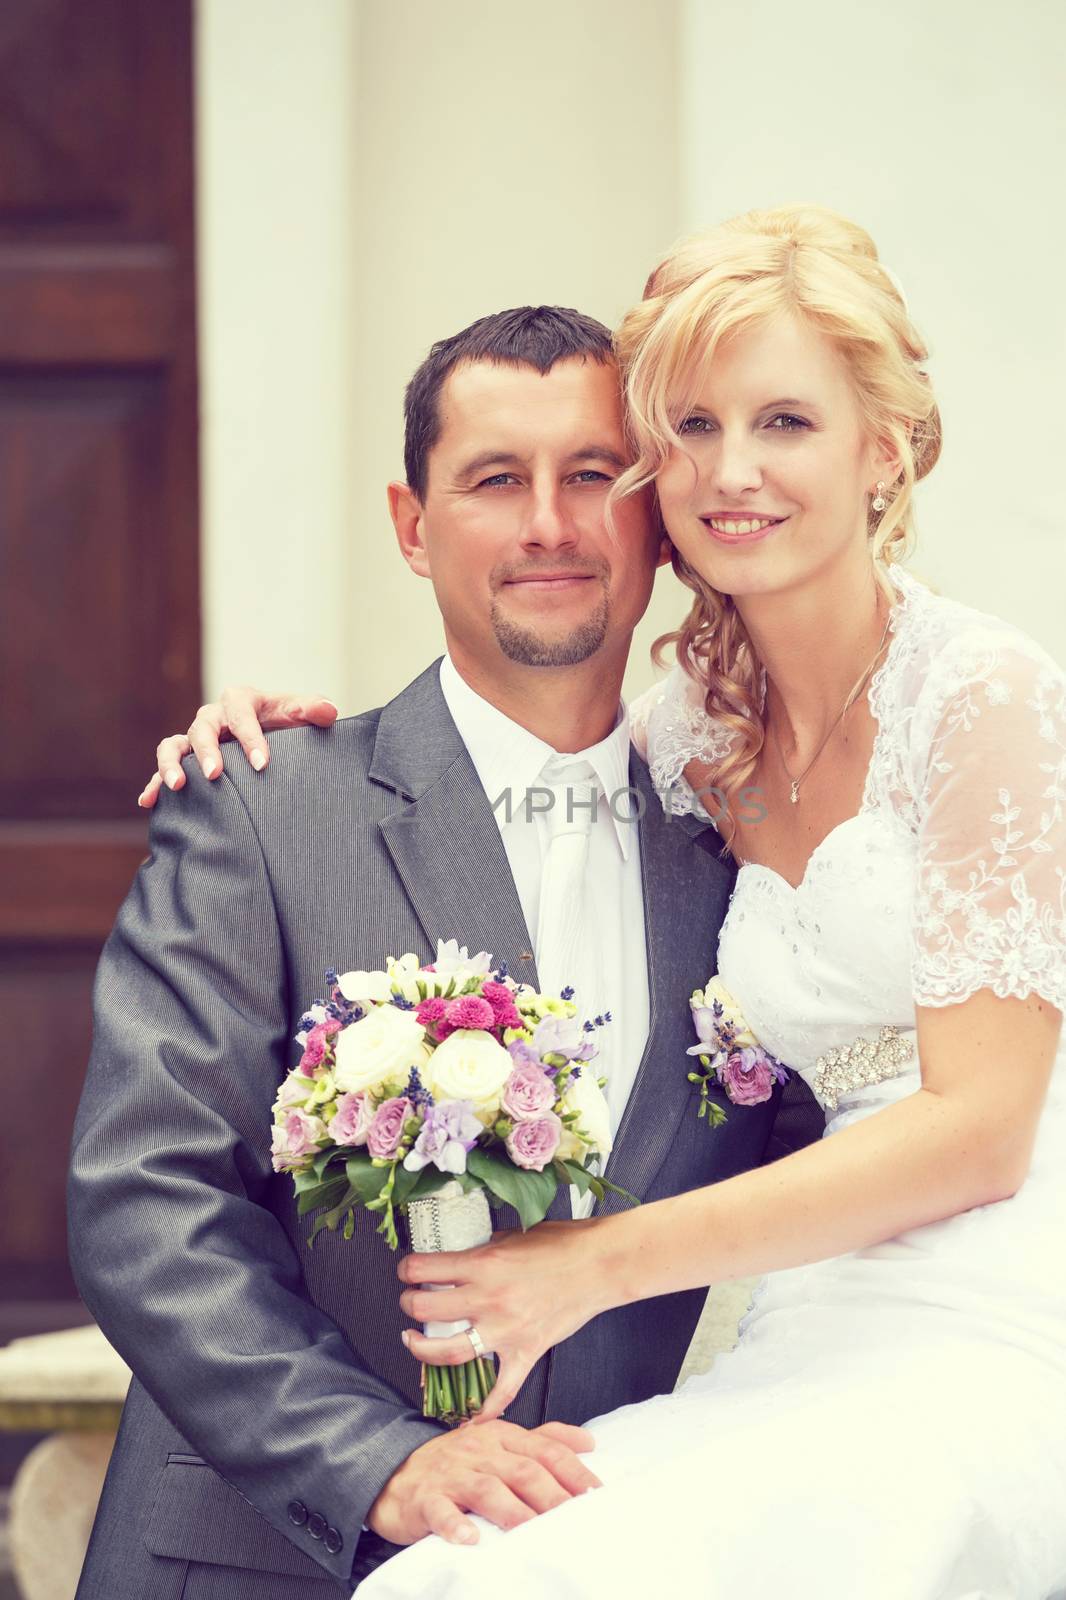 beautiful young wedding couple, blonde bride with flower and her groom, retro color tone